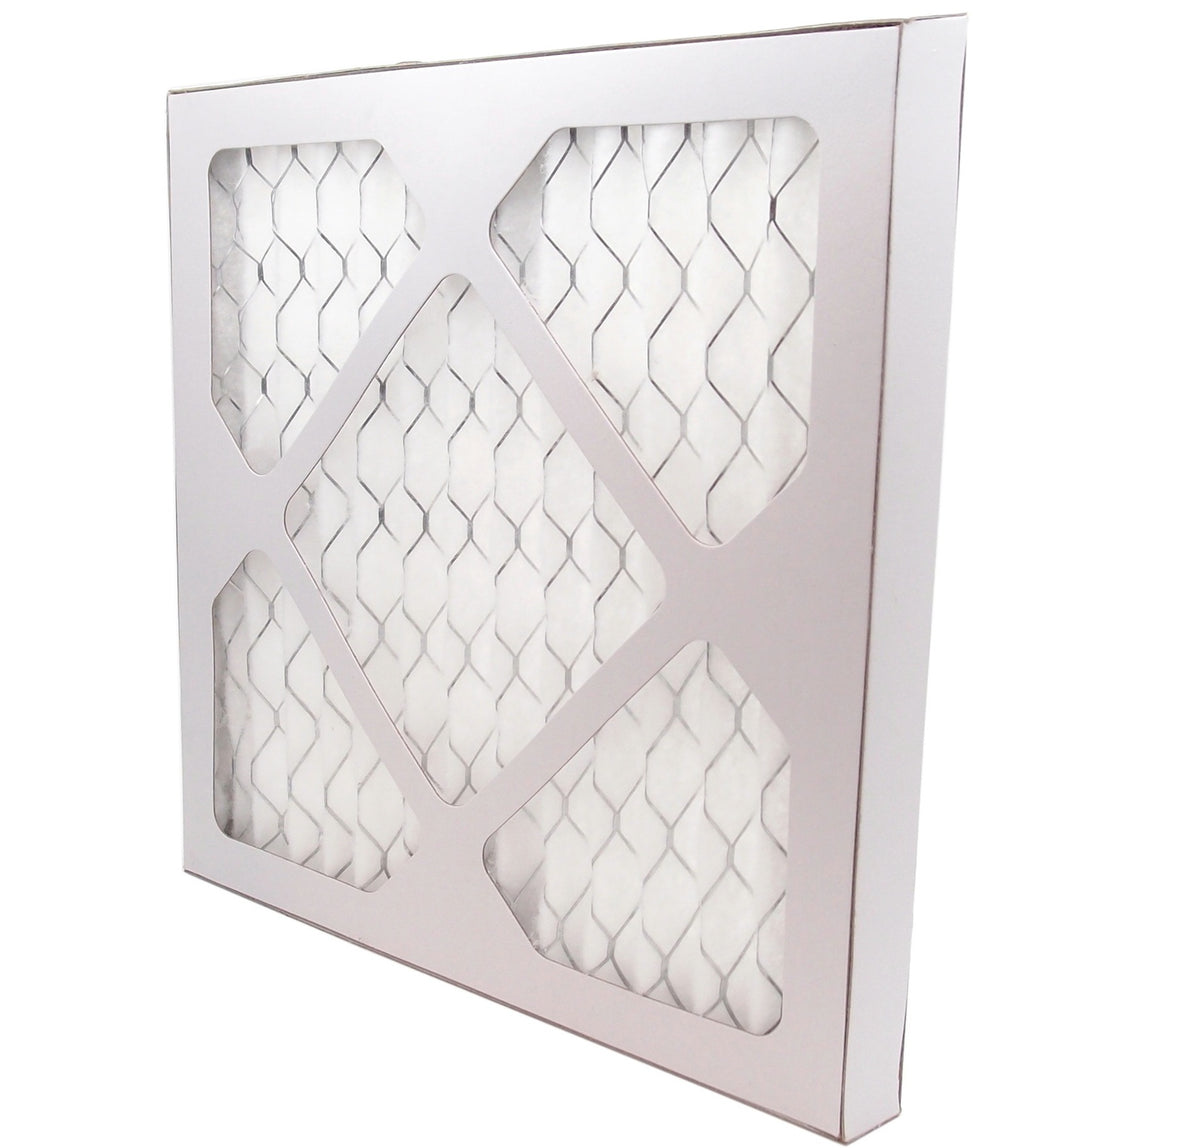 22&quot; x 12&quot; Pleated MERV 8 Filter for HVAC Return Filter Grille